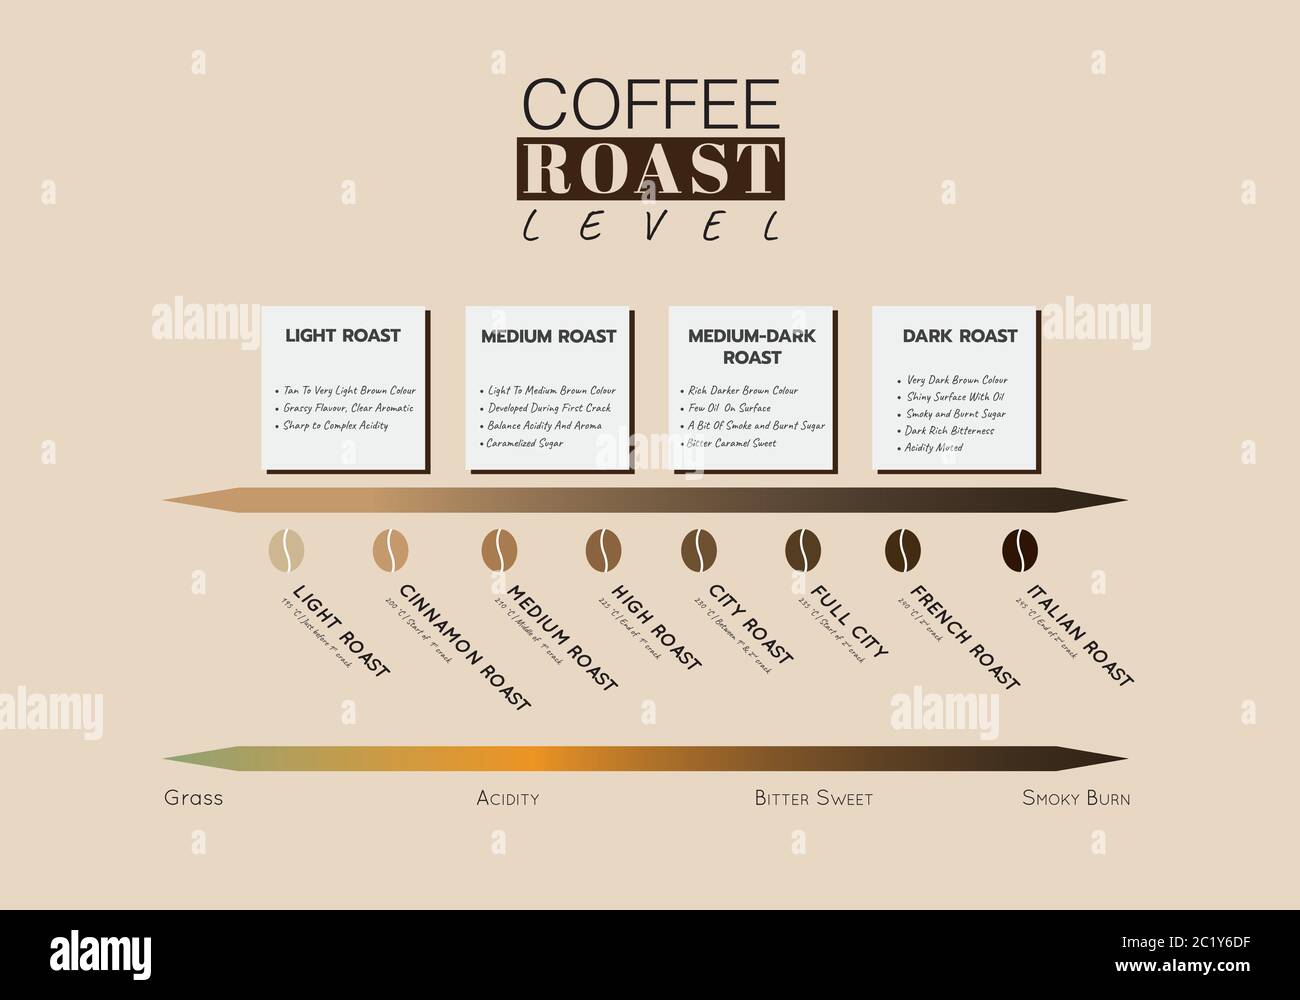 Level of coffee roasting. Level of Coffee Acidity and taste with roasting temperature and flavour note. Illustration vector graphic Stock Vector